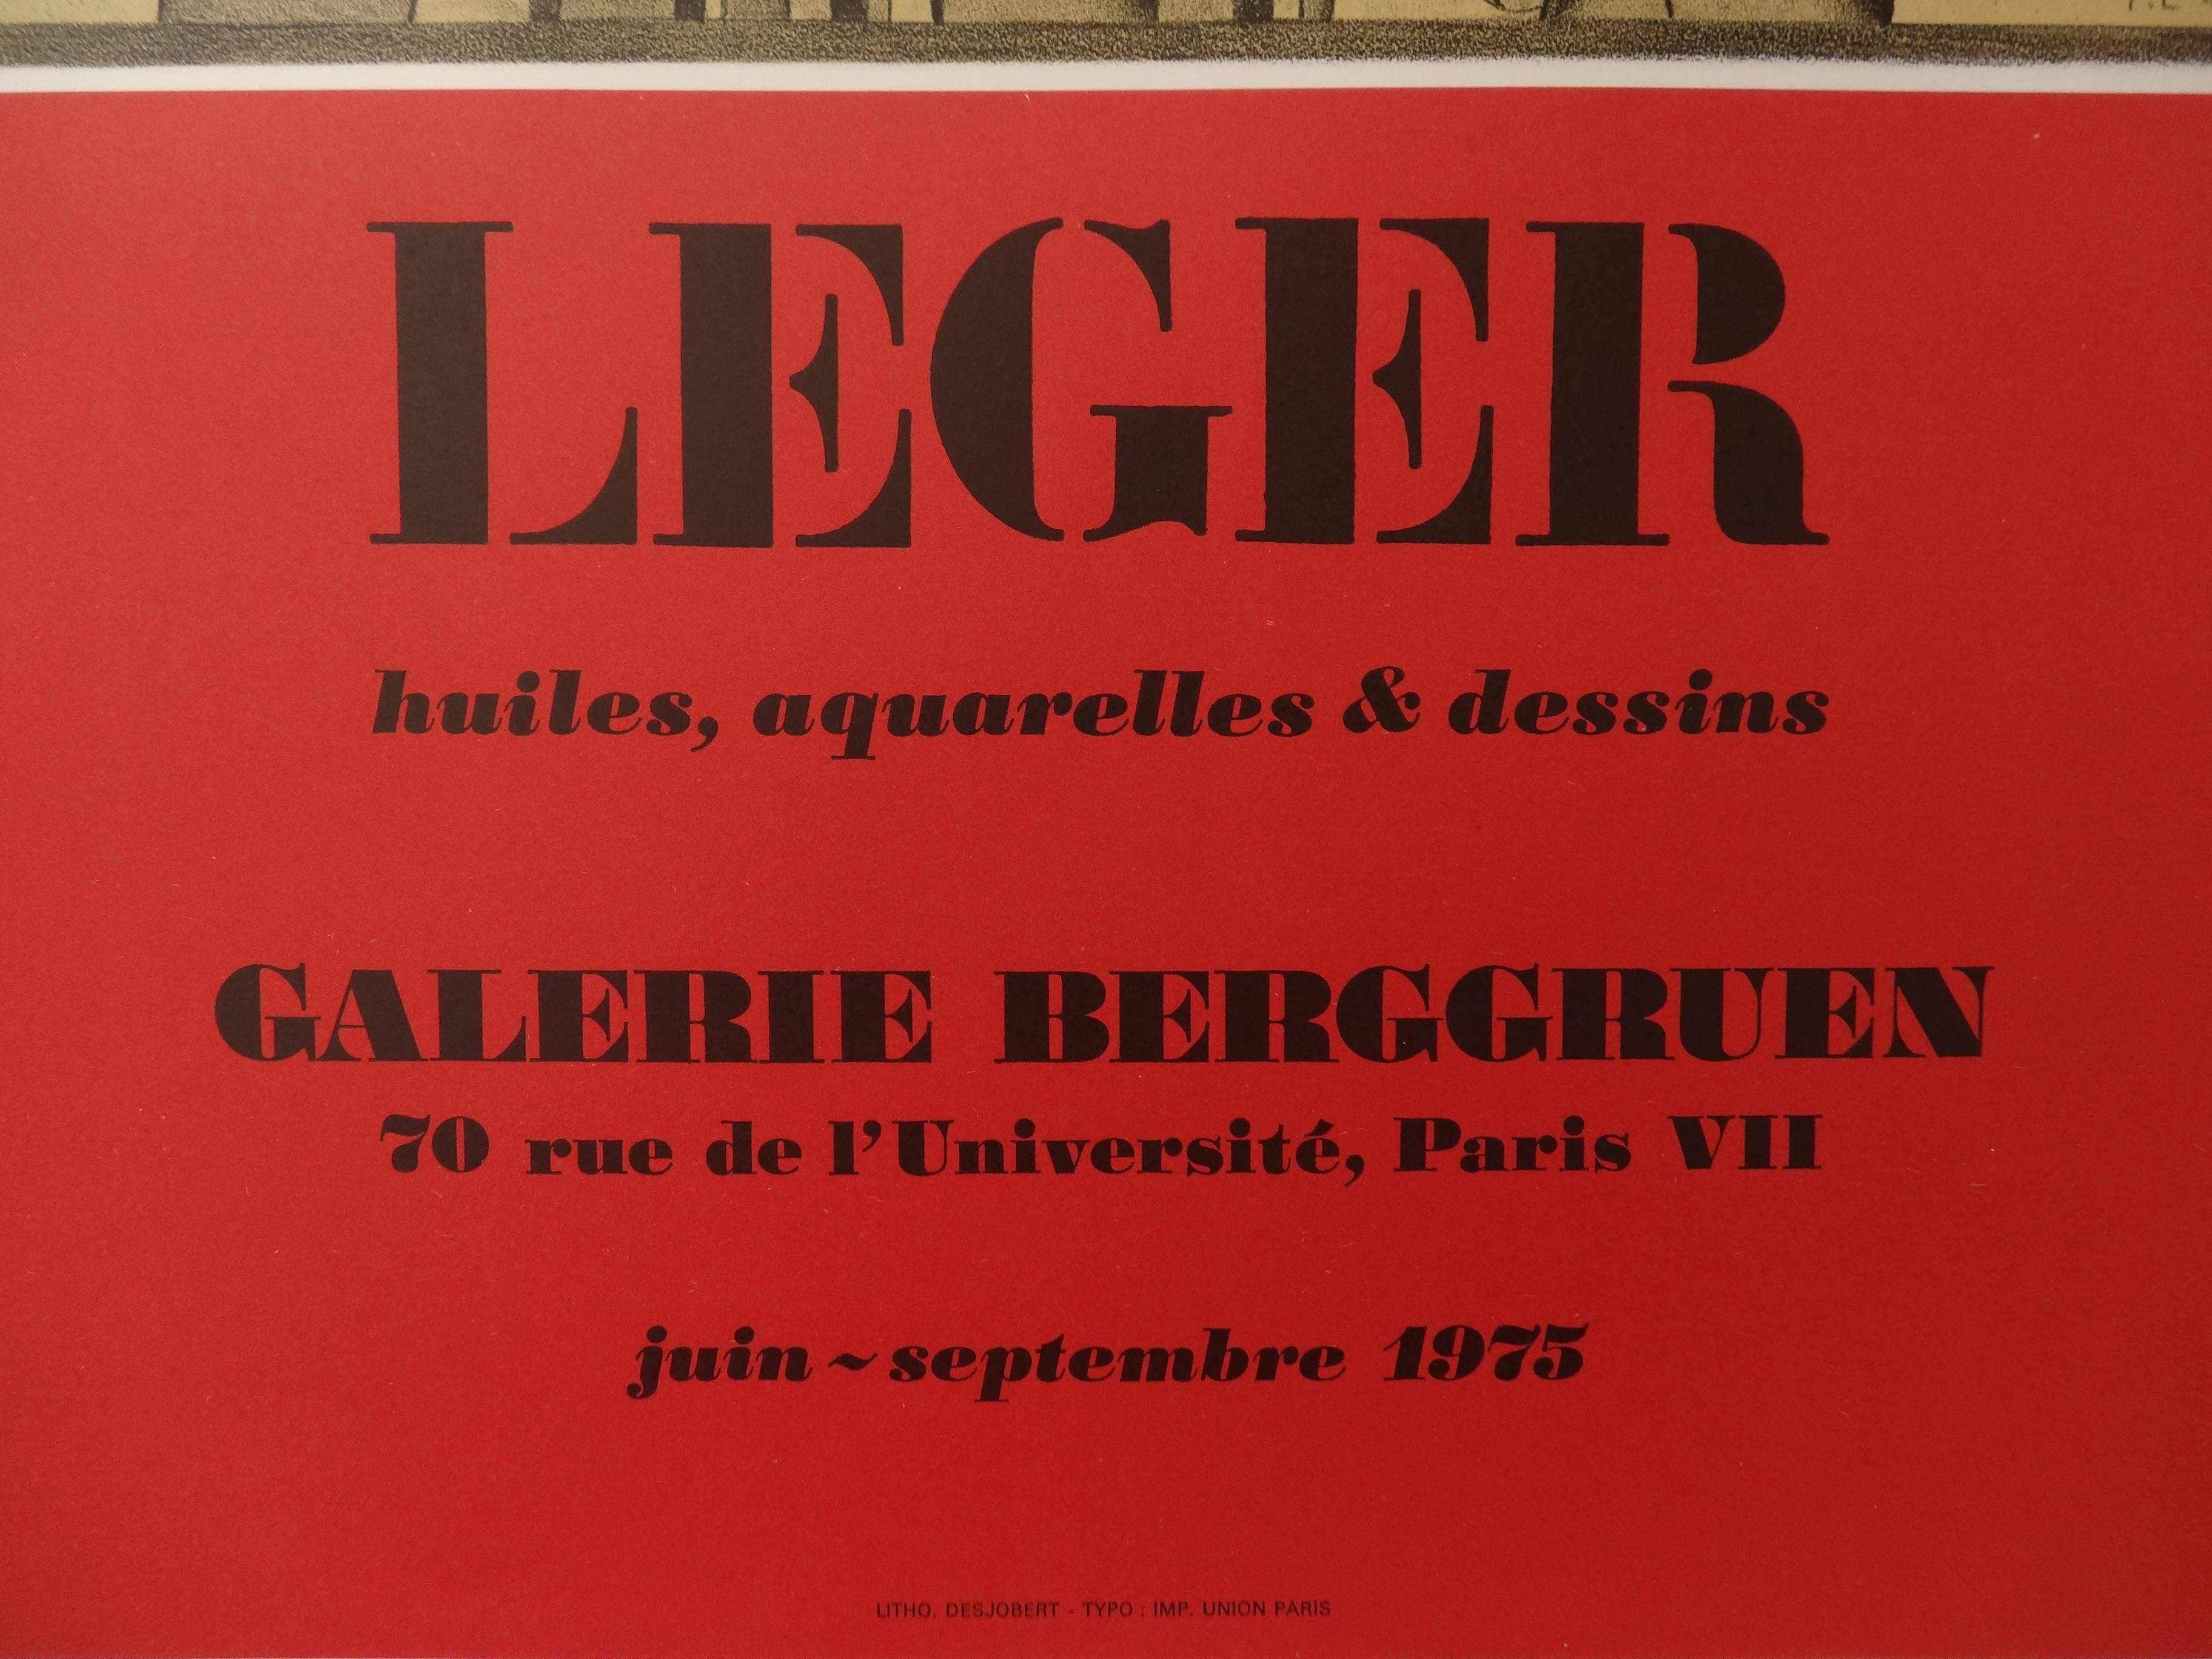 Fernand LÉGER (1881 - 1955)
Music : The Orchestra

Lithograph after a watercolor (printed in Atelier Mourlot)
Signature printed in the plate
On paper 66  x 50 cm (c. 26 x 20 inch)

Information : Poster for the exhibition 